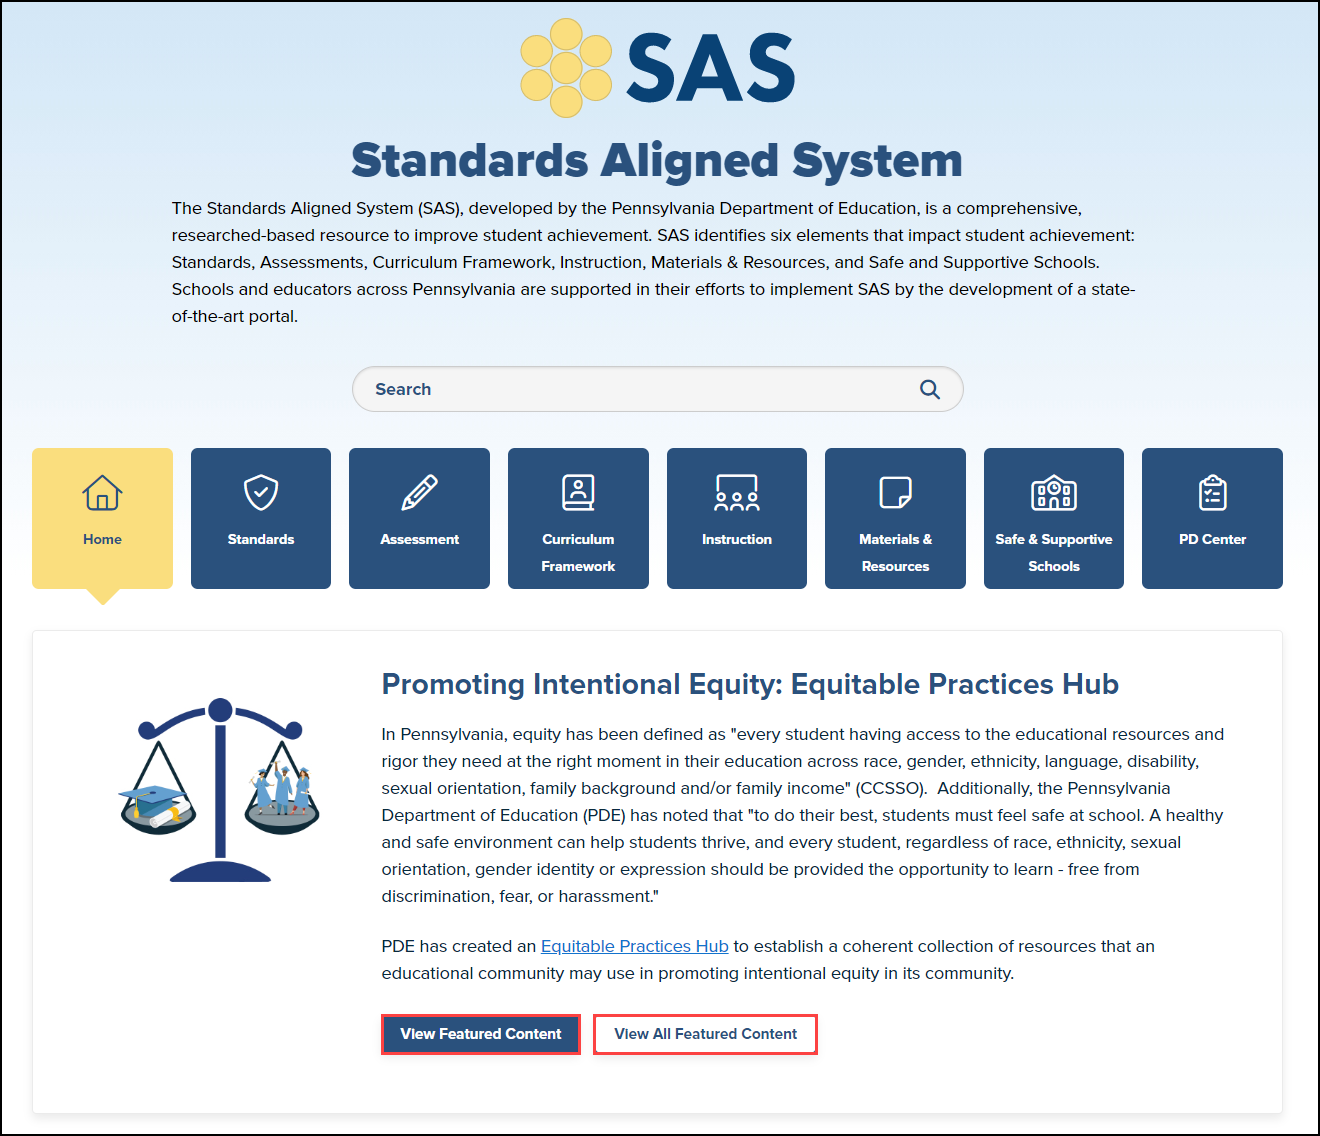 sas homepage with view featured content and view all featured content buttons highlighted